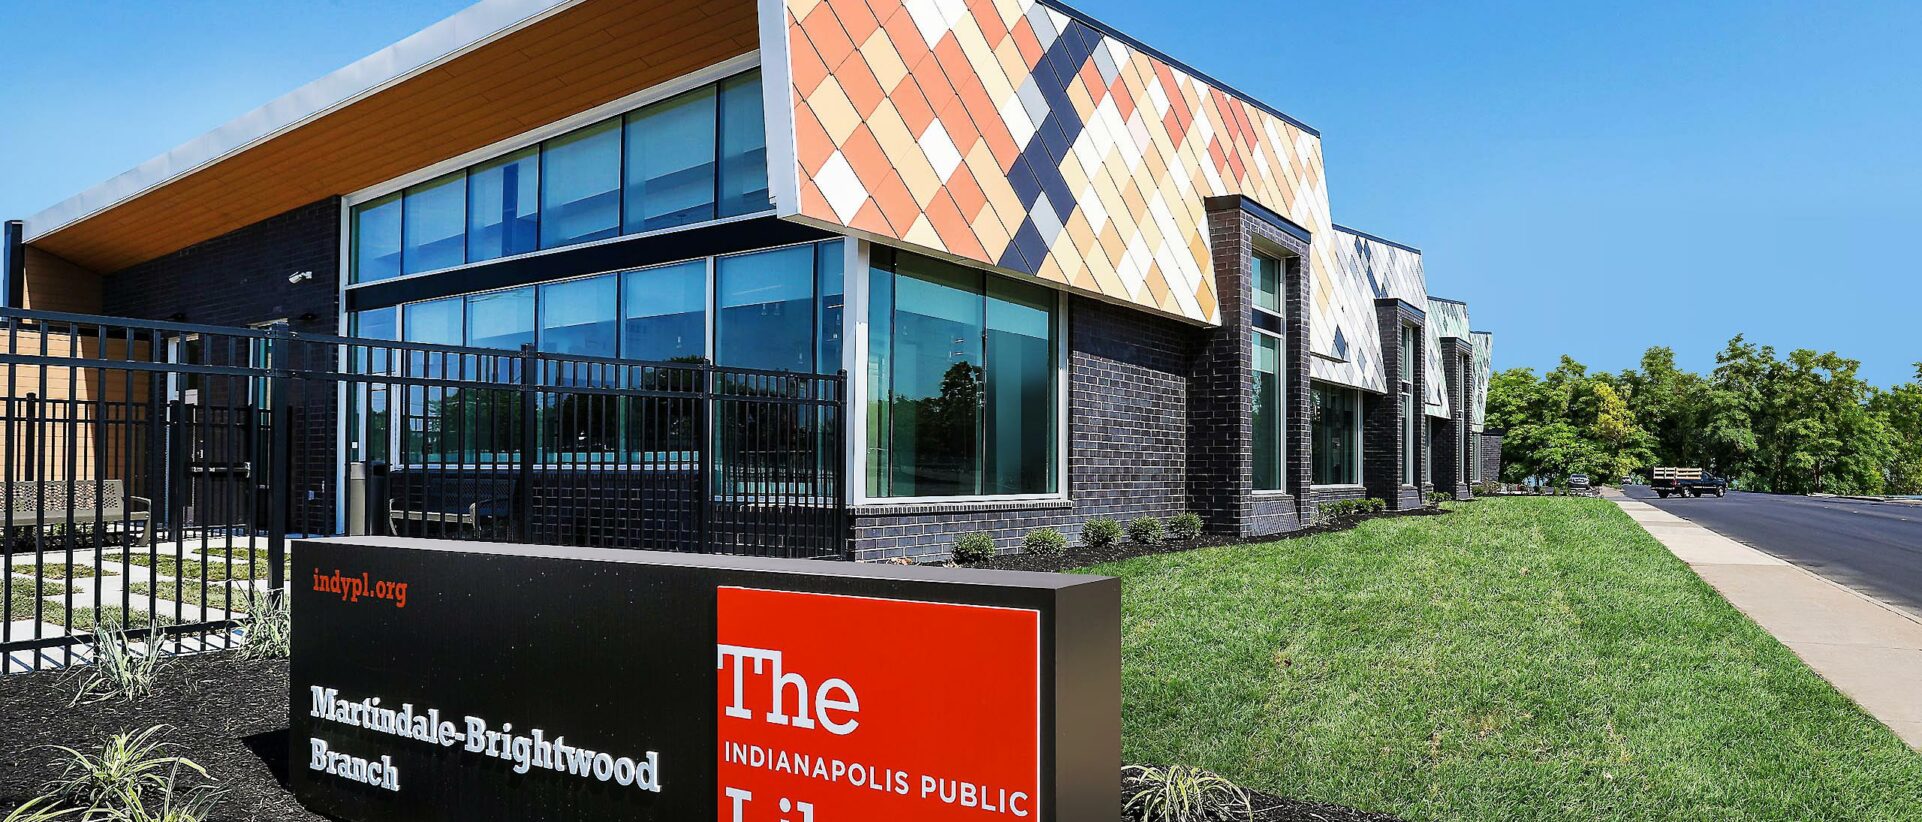 Close up of exterior sign in front of the Martindale-Brightwood Branch of the Indianapolis Public Library